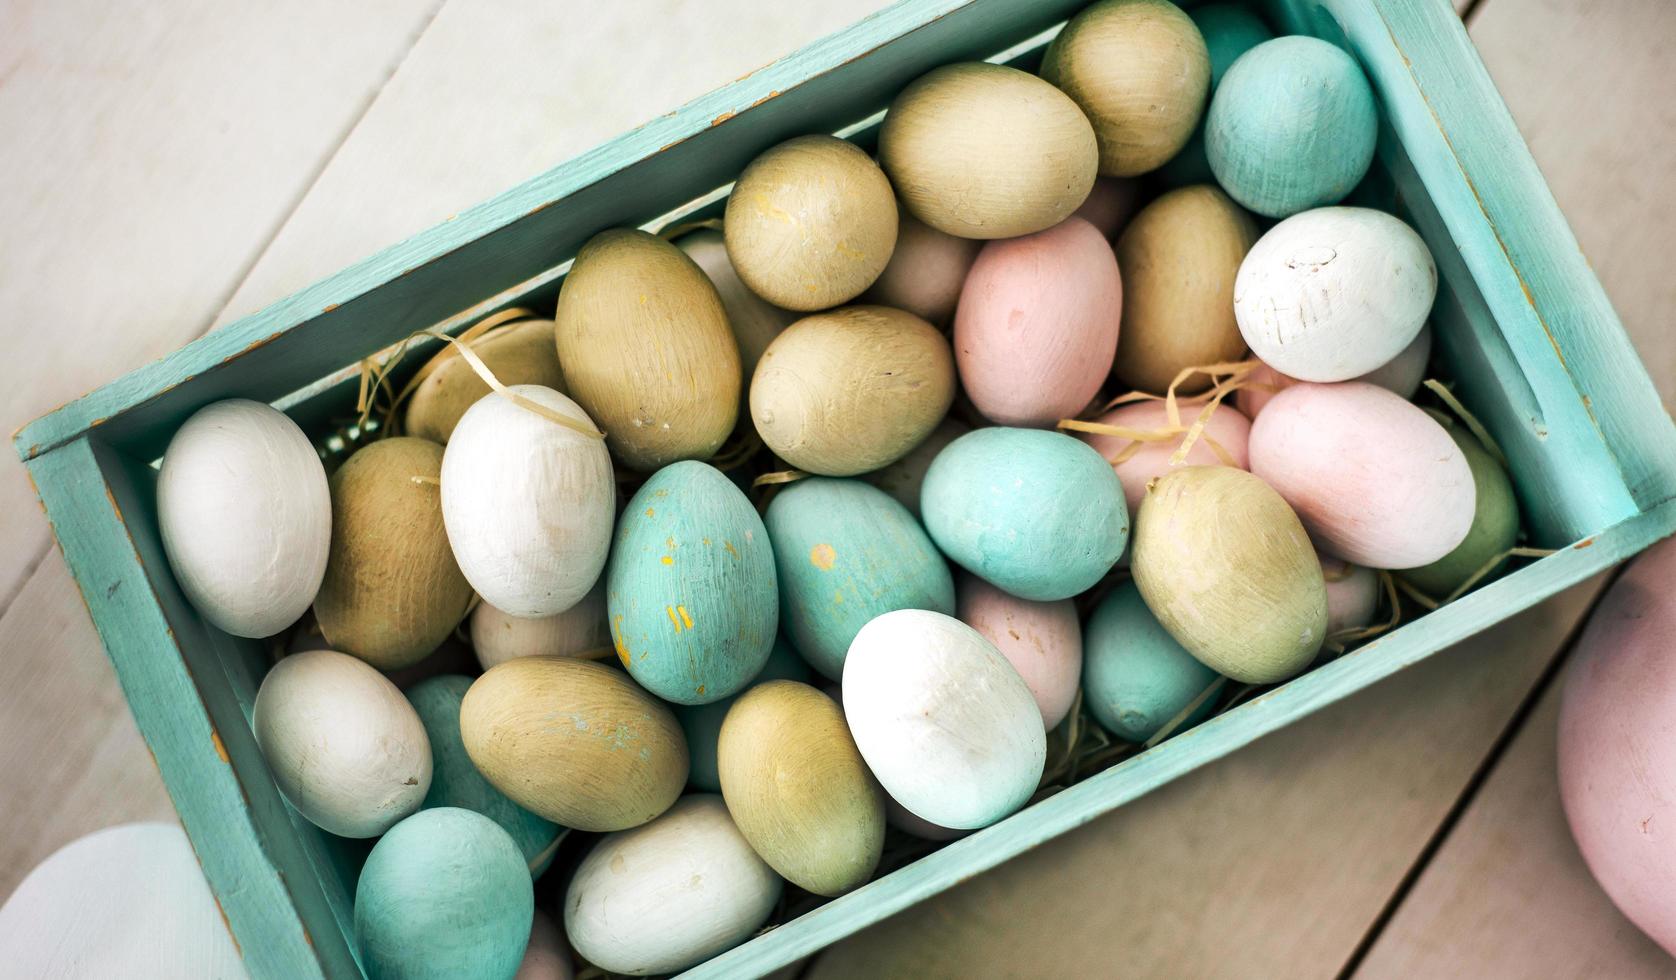 Crate of Easter eggs photo